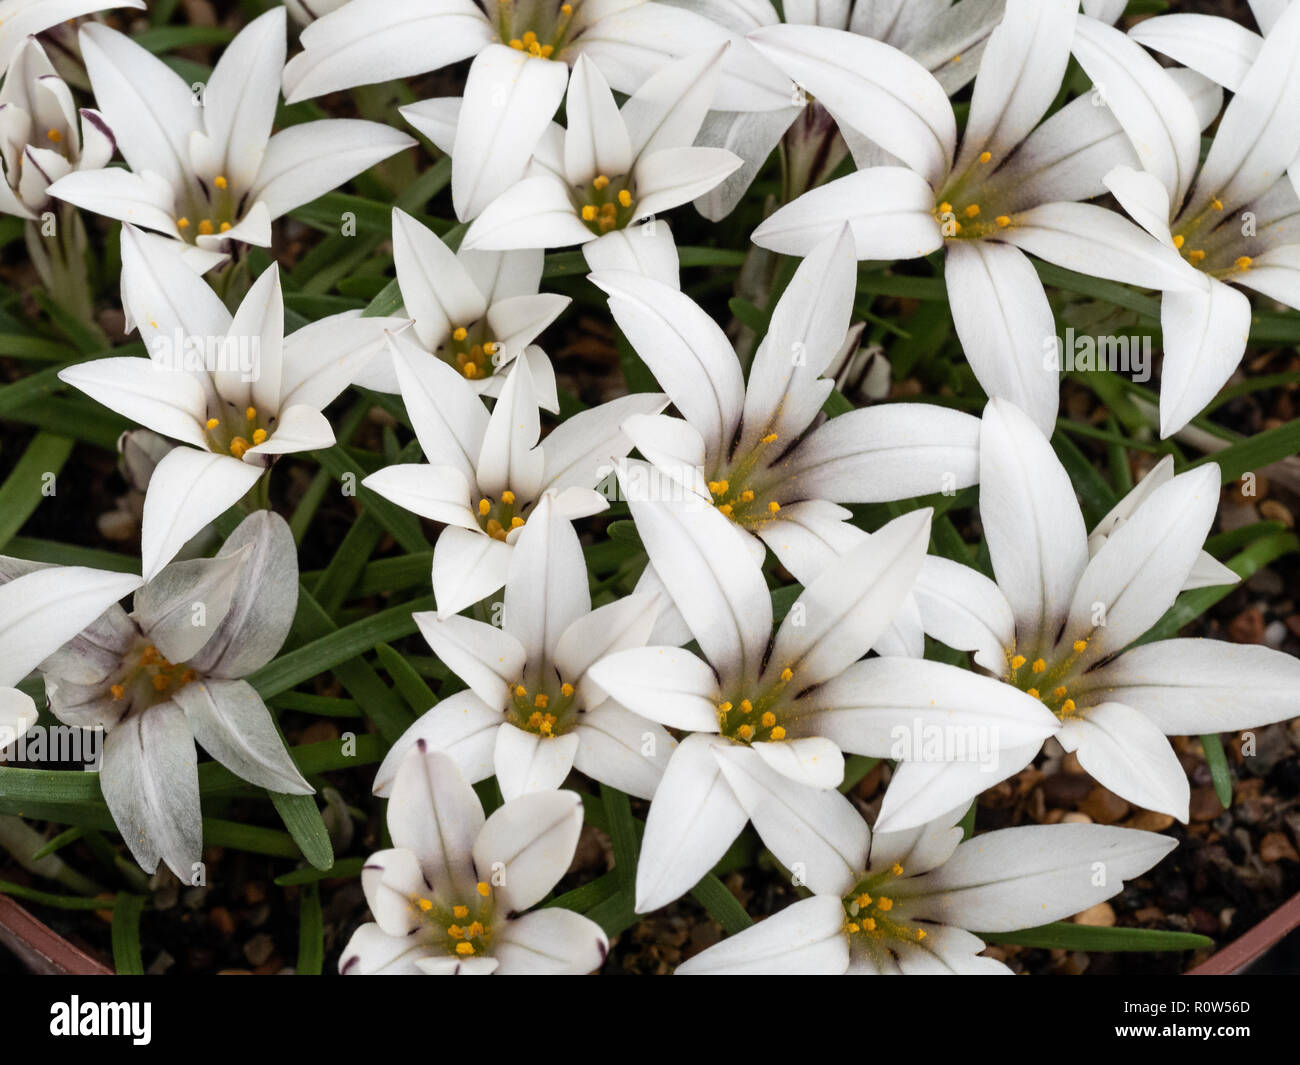 A close up of a group of the starry white flowers of Ipheion sessile Stock Photo